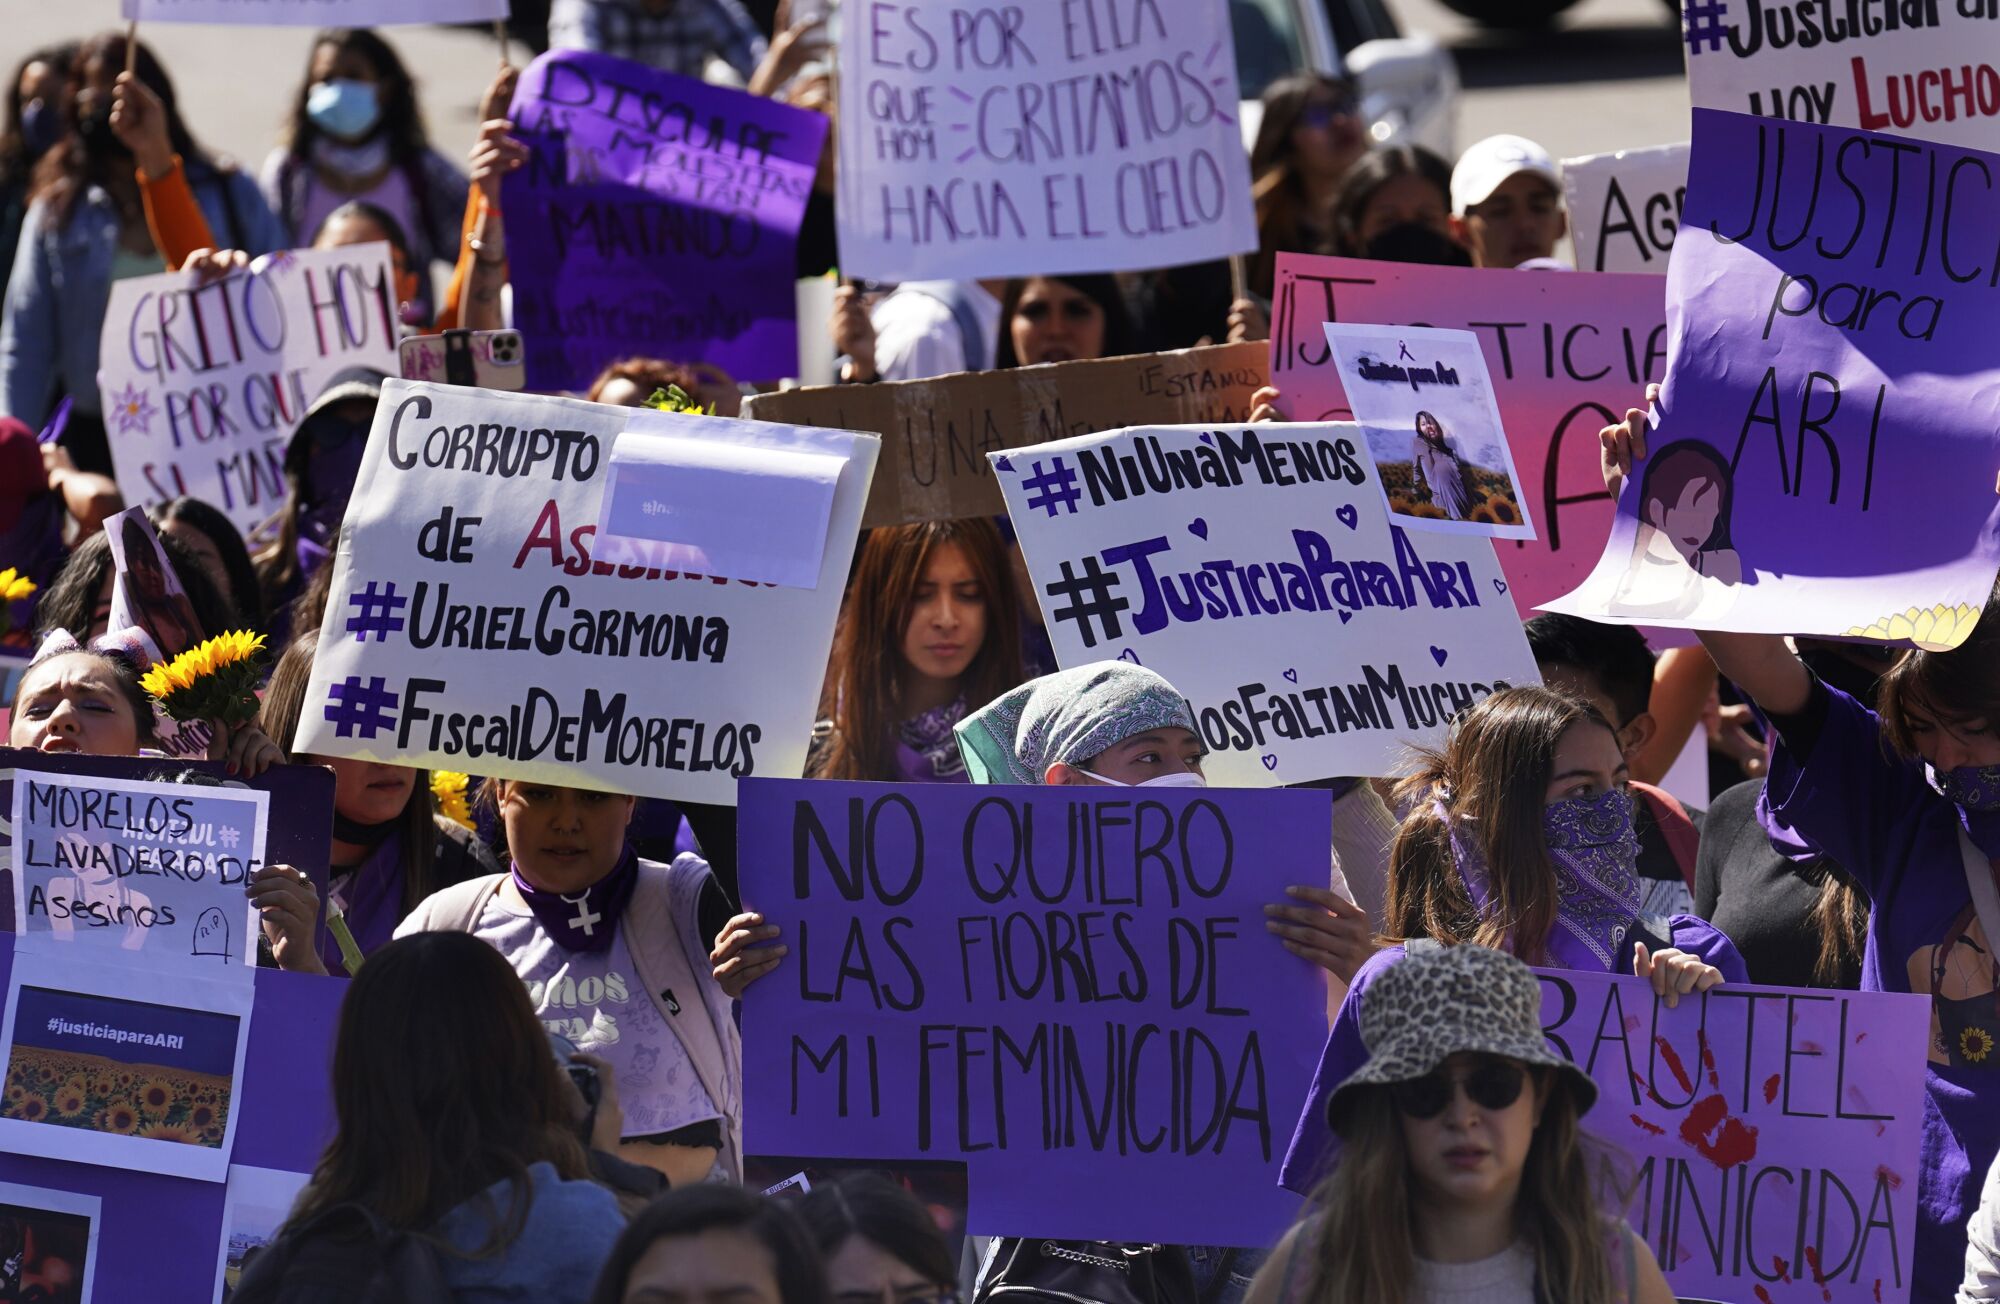 Members of feminist groups march in Mexico City to protest the slaying of Ariadna López.